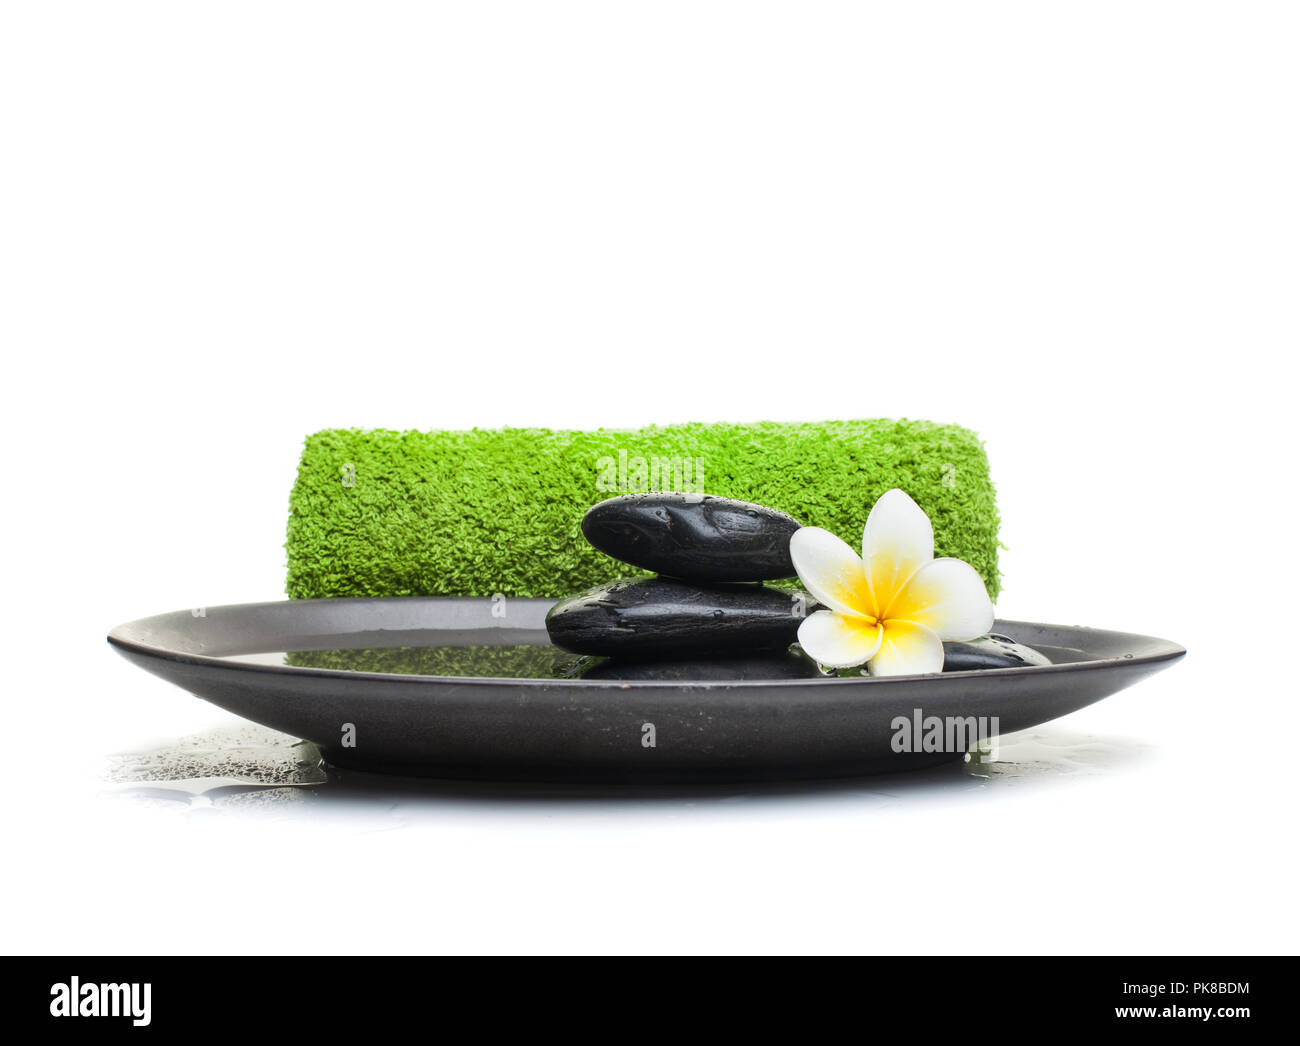 Spa objects and green towel on black plate Stock Photo